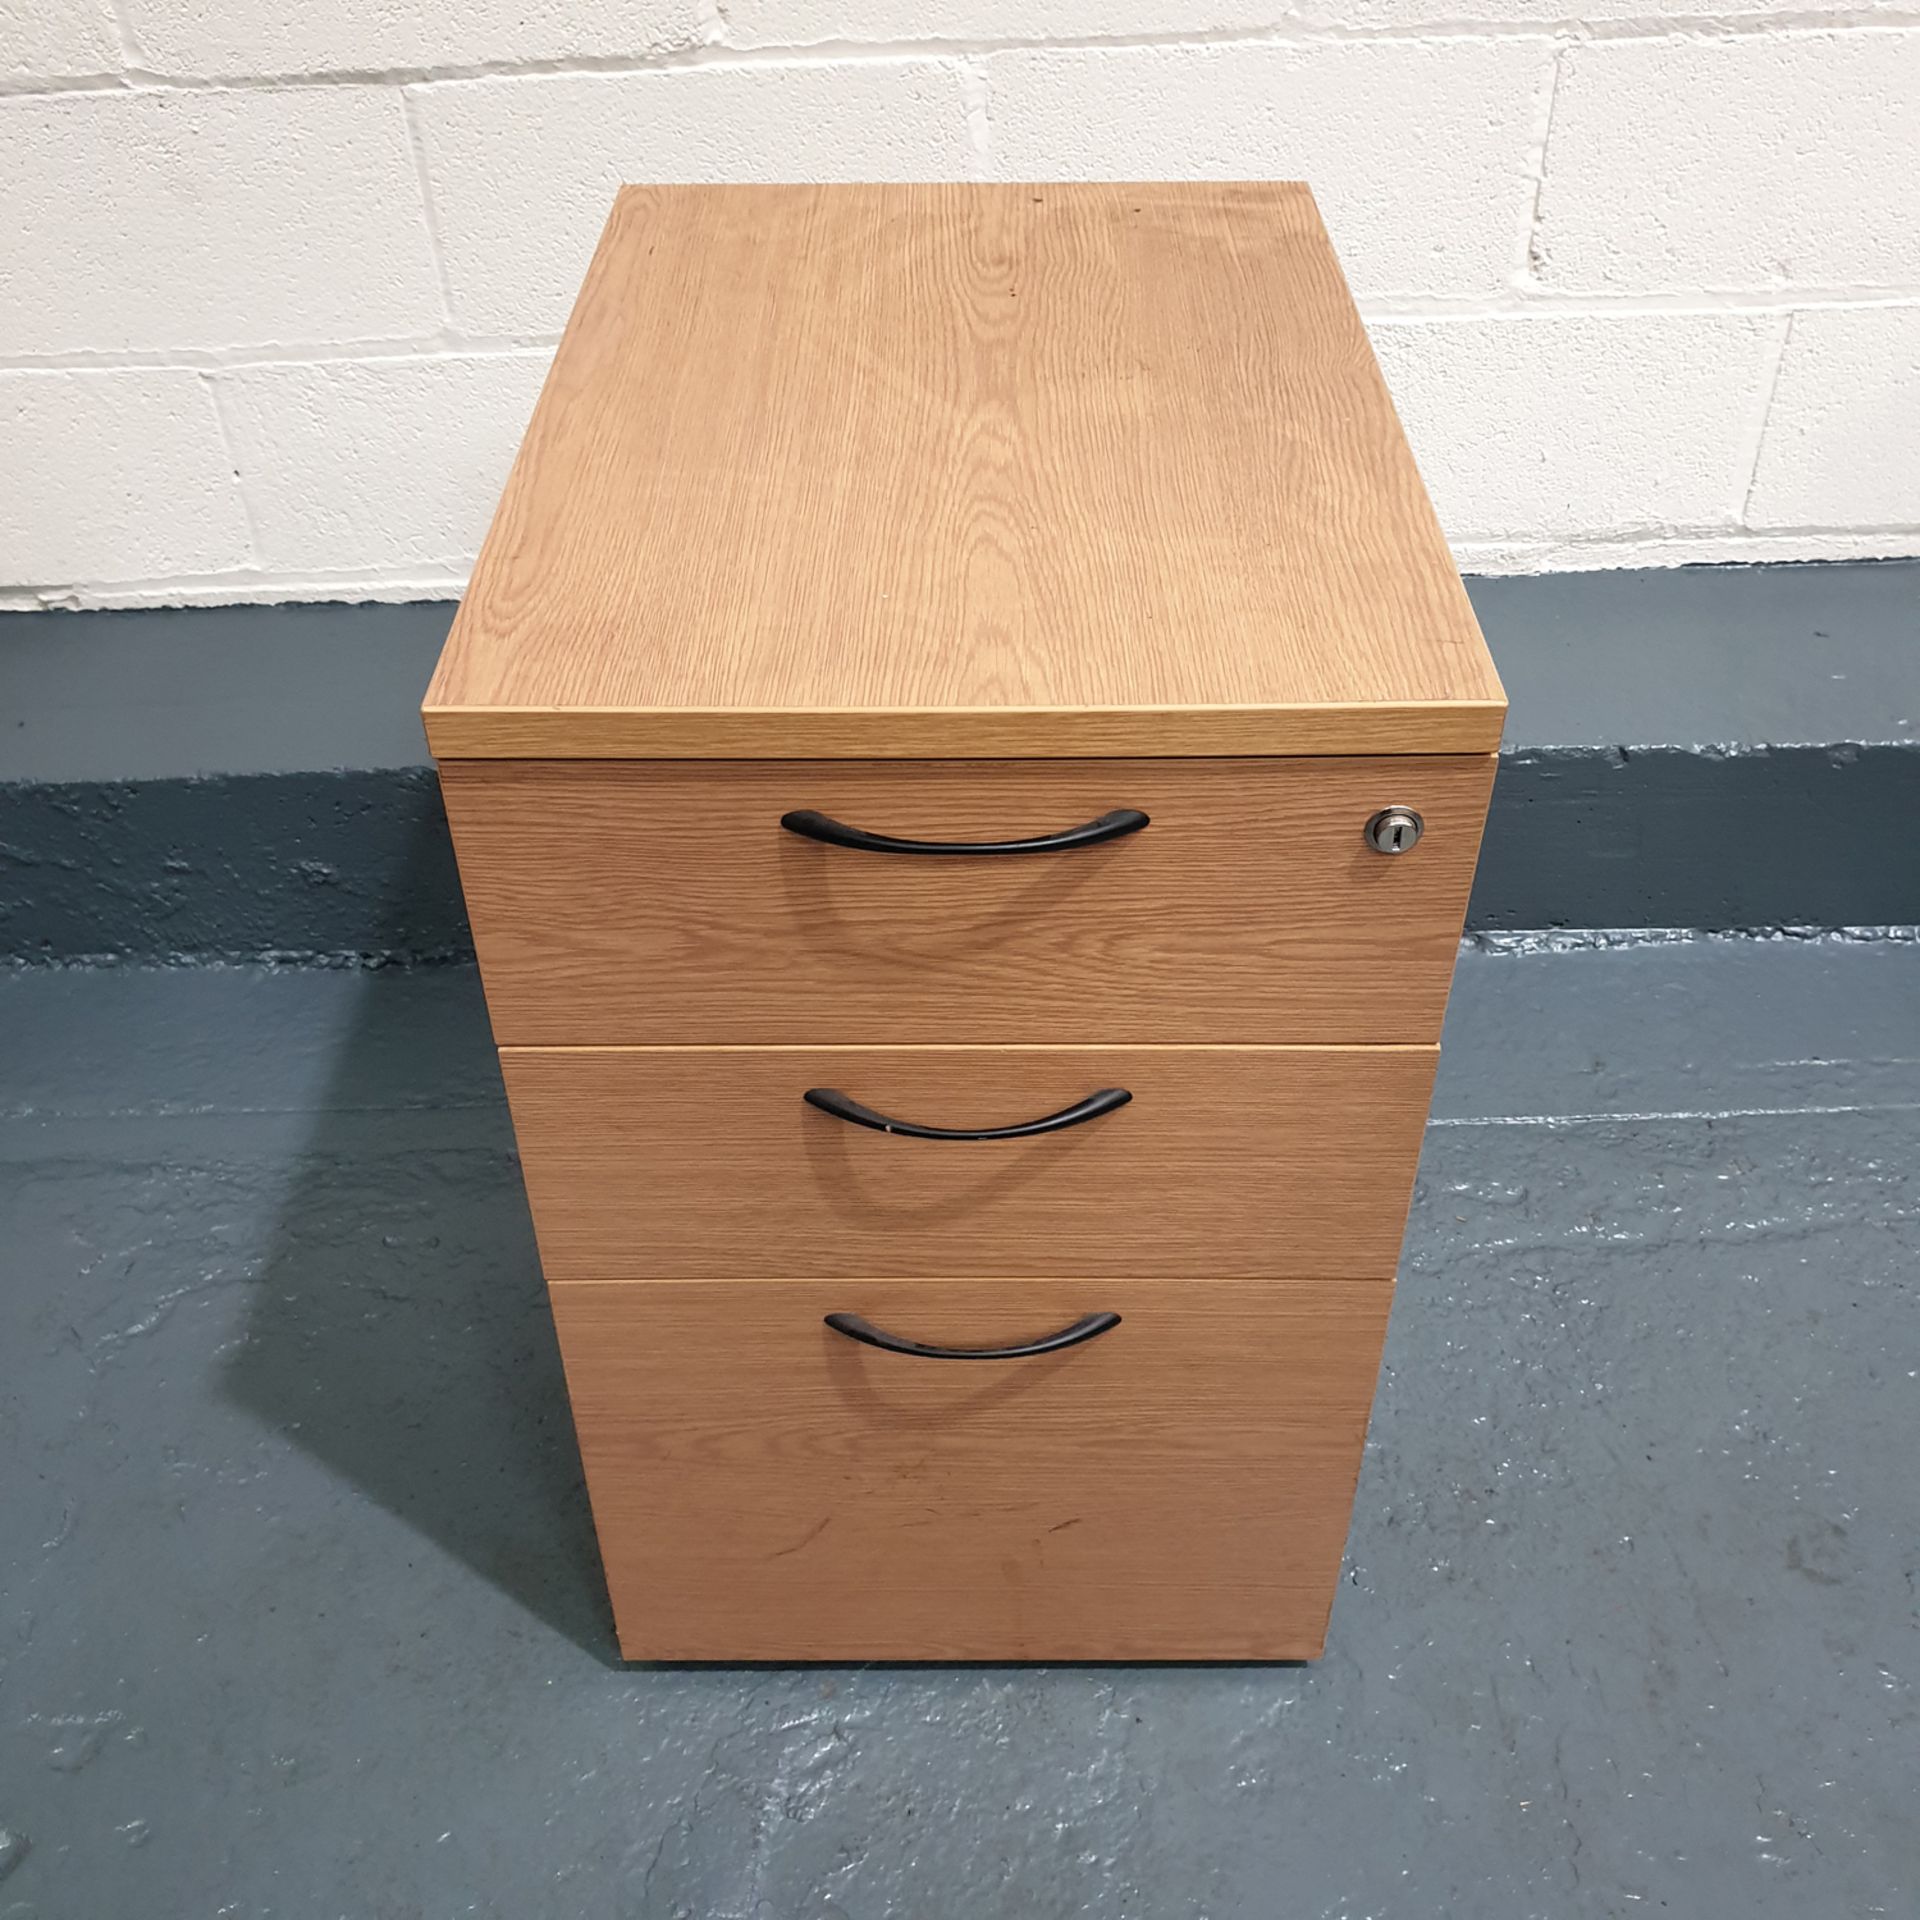 Chest of Drawers. No Key. Approx Dimensions 430mm x 600mm x 720mm High.